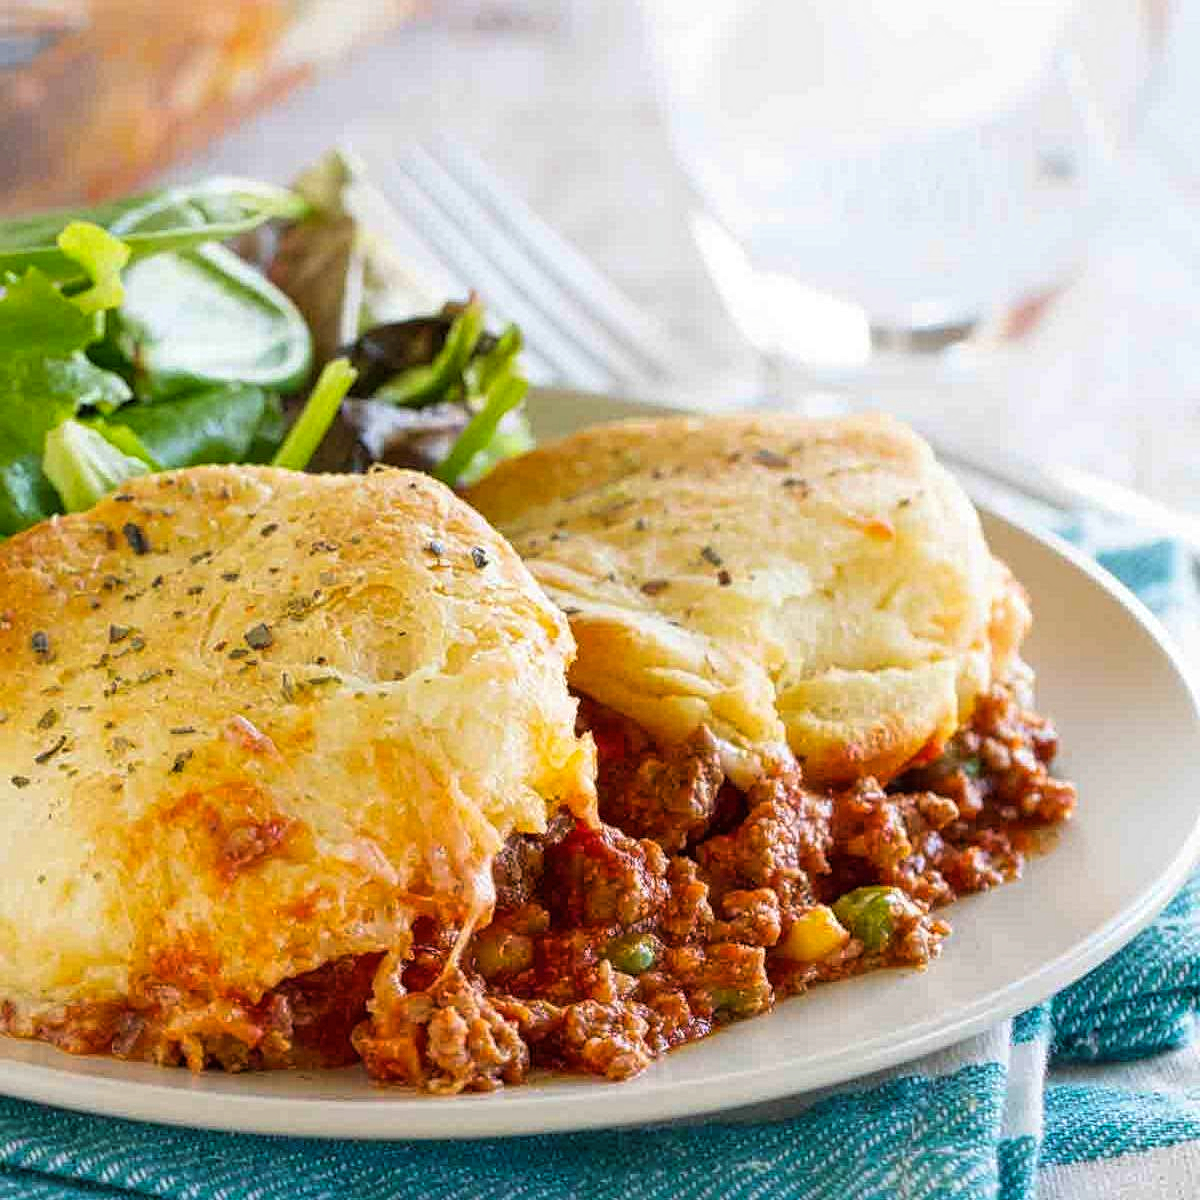 7. Italian Ground Beef Casserole with Biscuit Topping